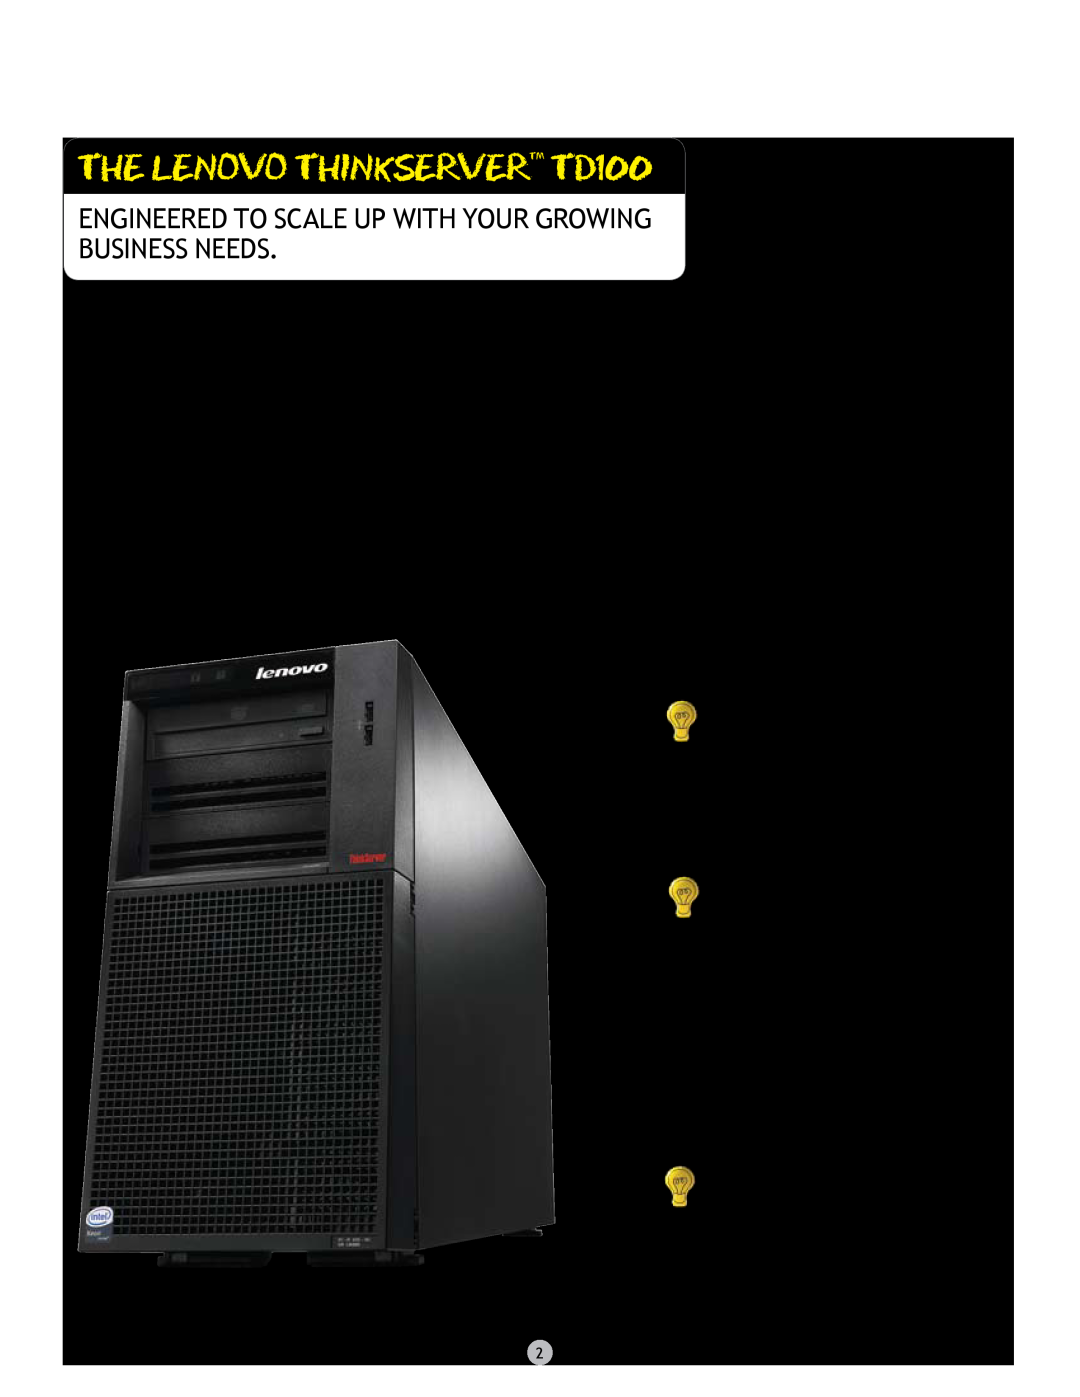 Lenovo 6429-15x THE lenovo THINKSERVER TD100, Engineered To Scale Up With Your Growing, Business Needs, Rock-Solidhardware 